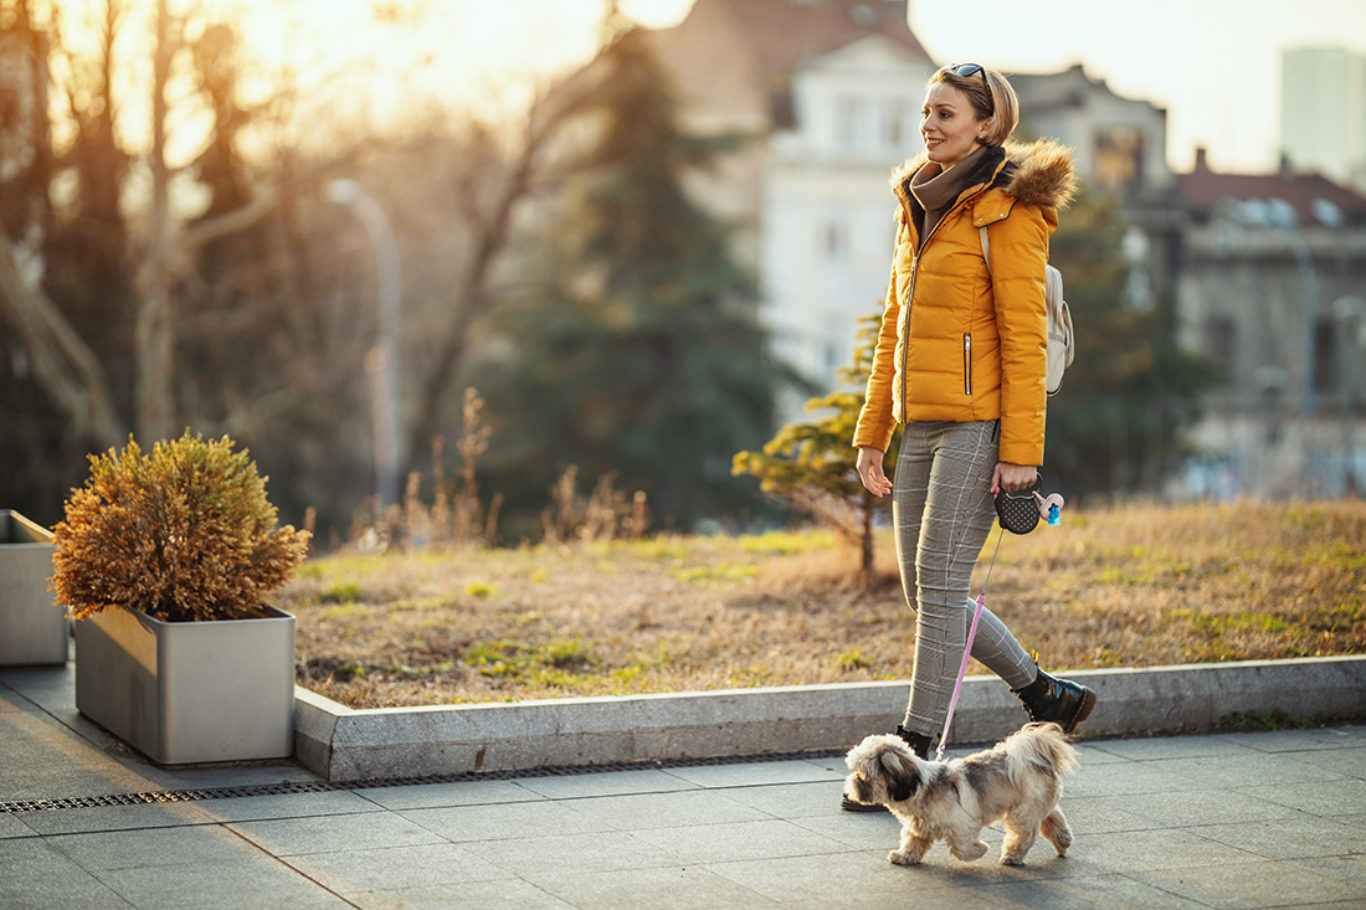 Beautiful young fashion woman is spending time with her cute pet dog, walking along the city street.